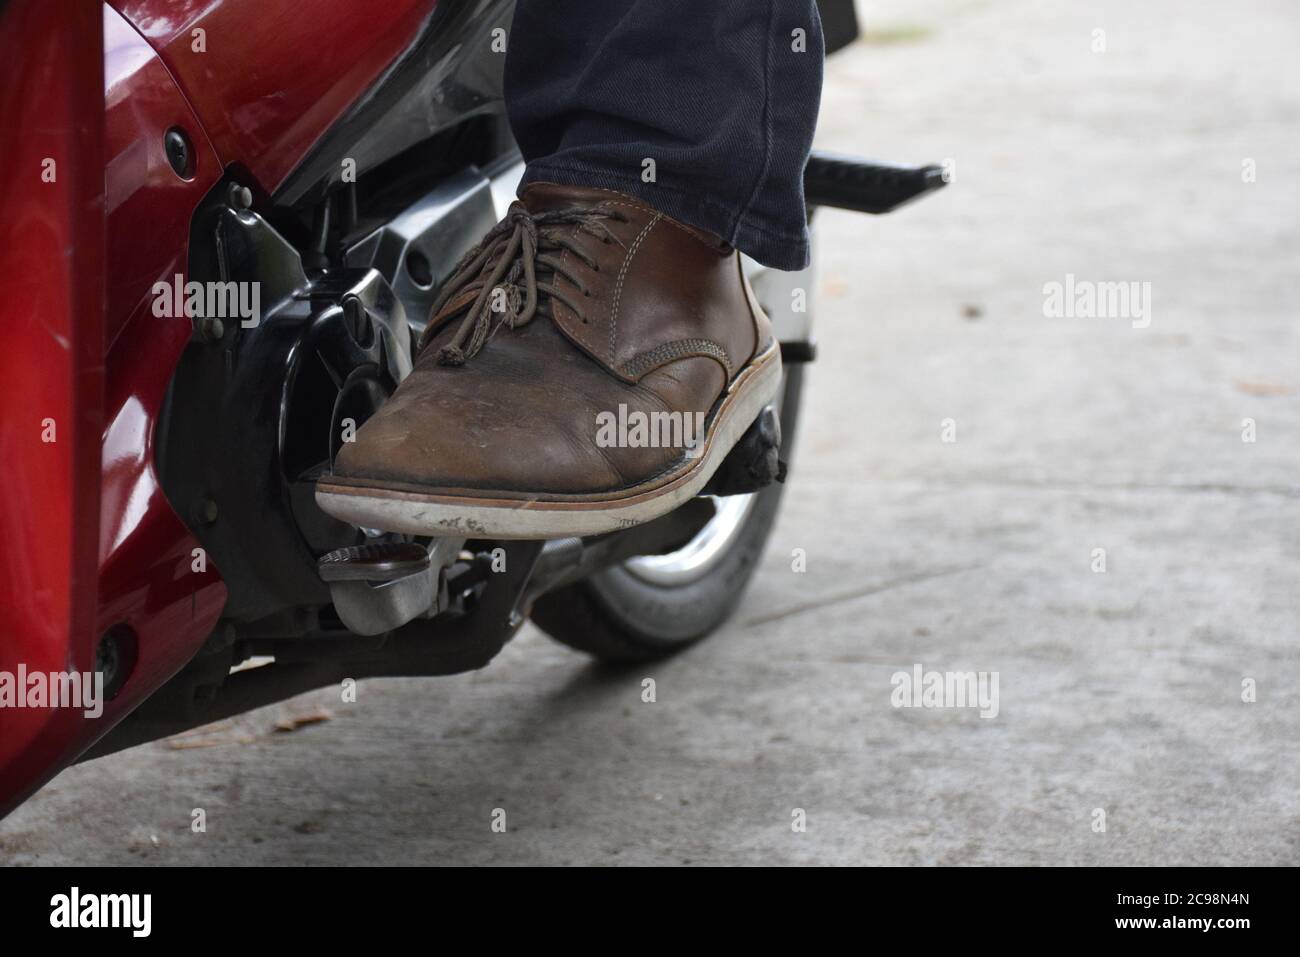 Shift Into First Gear and Upshift into higher gears. on a Motorcycle Stock Photo